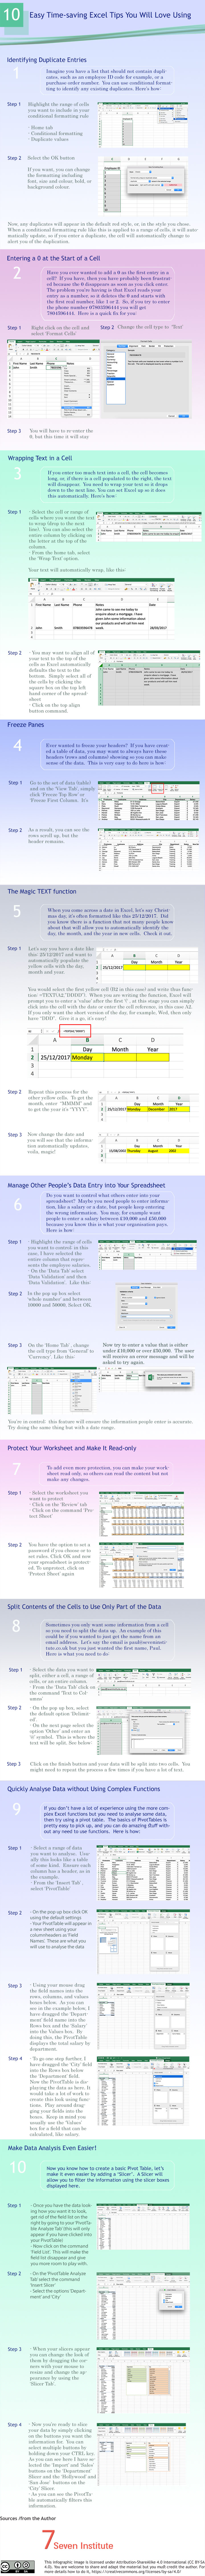 Infograph 10 Easy Saving Excel Tips